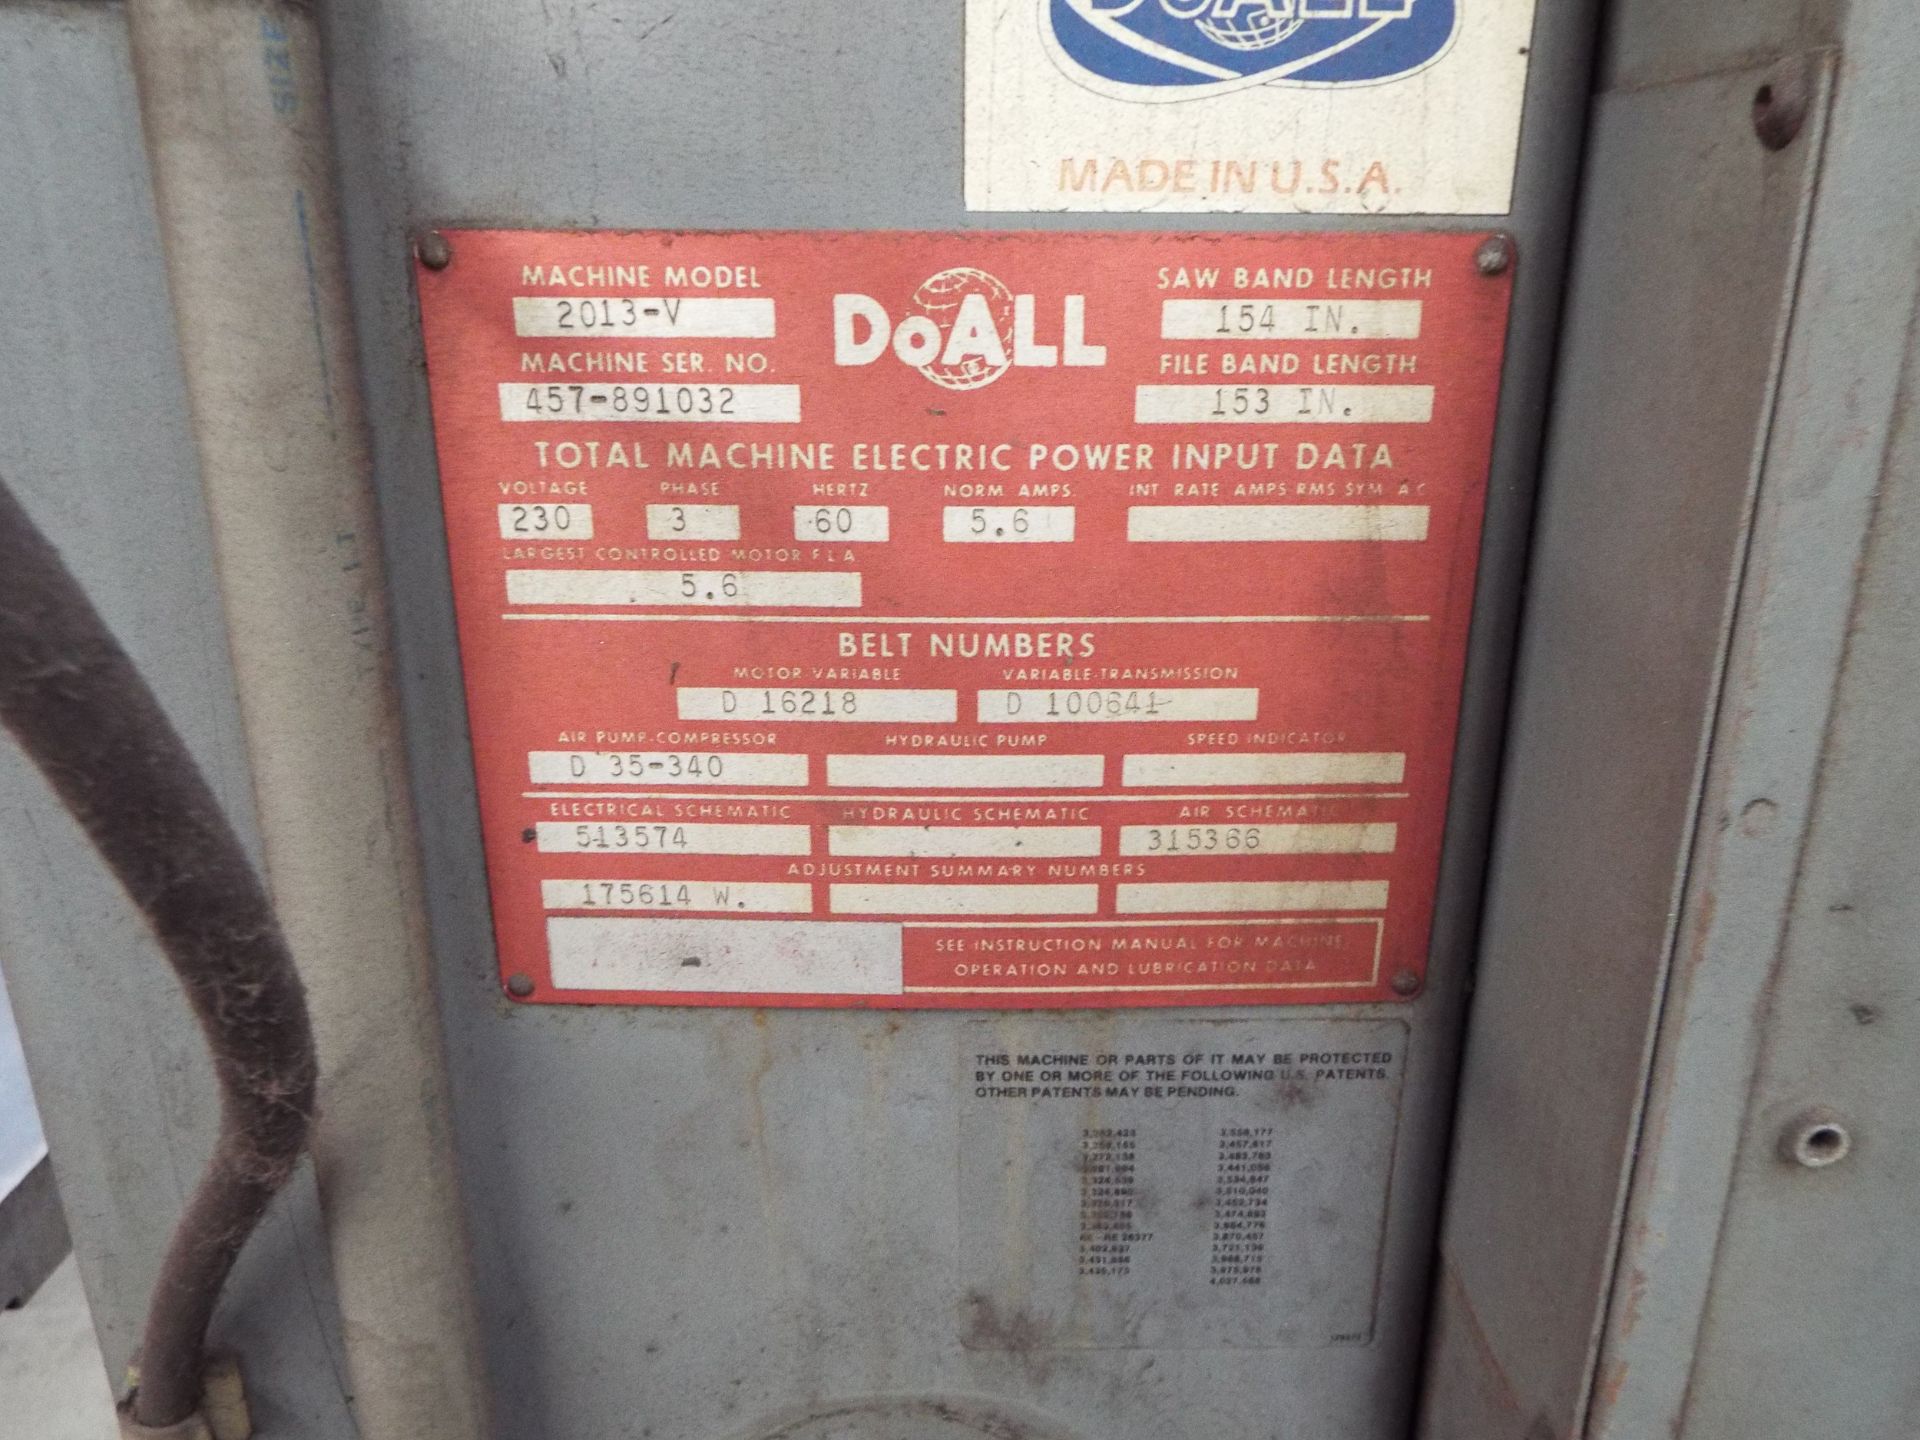 DOALL 2013-V VERTICAL BAND SAW WITH BLADE WELDER AND GRINDER, S/N 457-891032 (CI) - Image 5 of 6